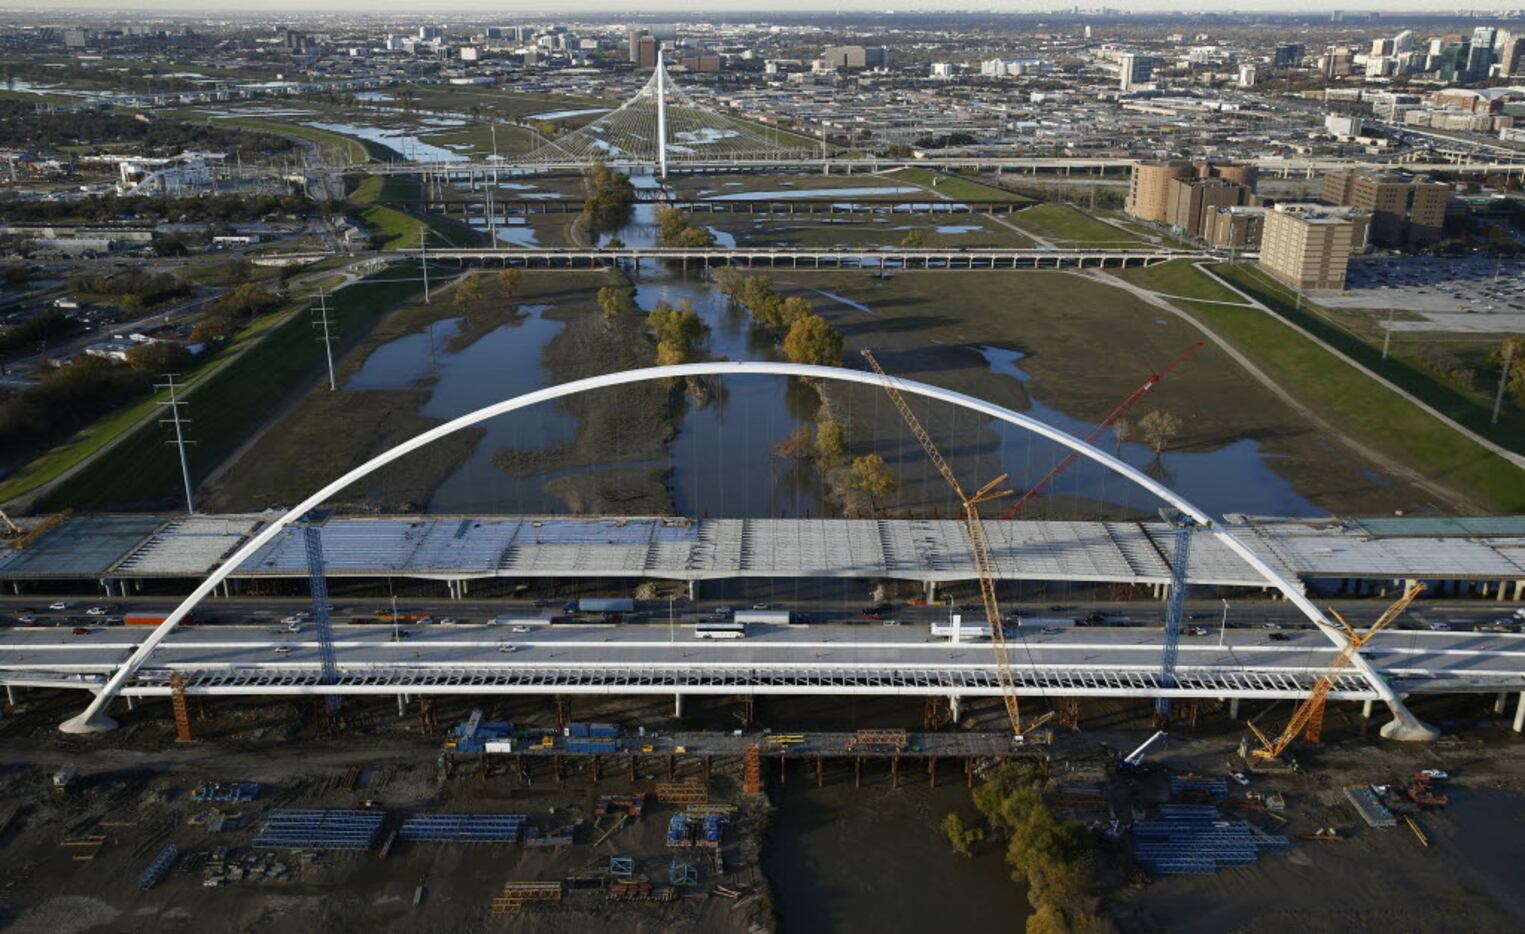 An aerial view looking north of the Margaret McDermott Bridge (foreground) and the Calatrava...